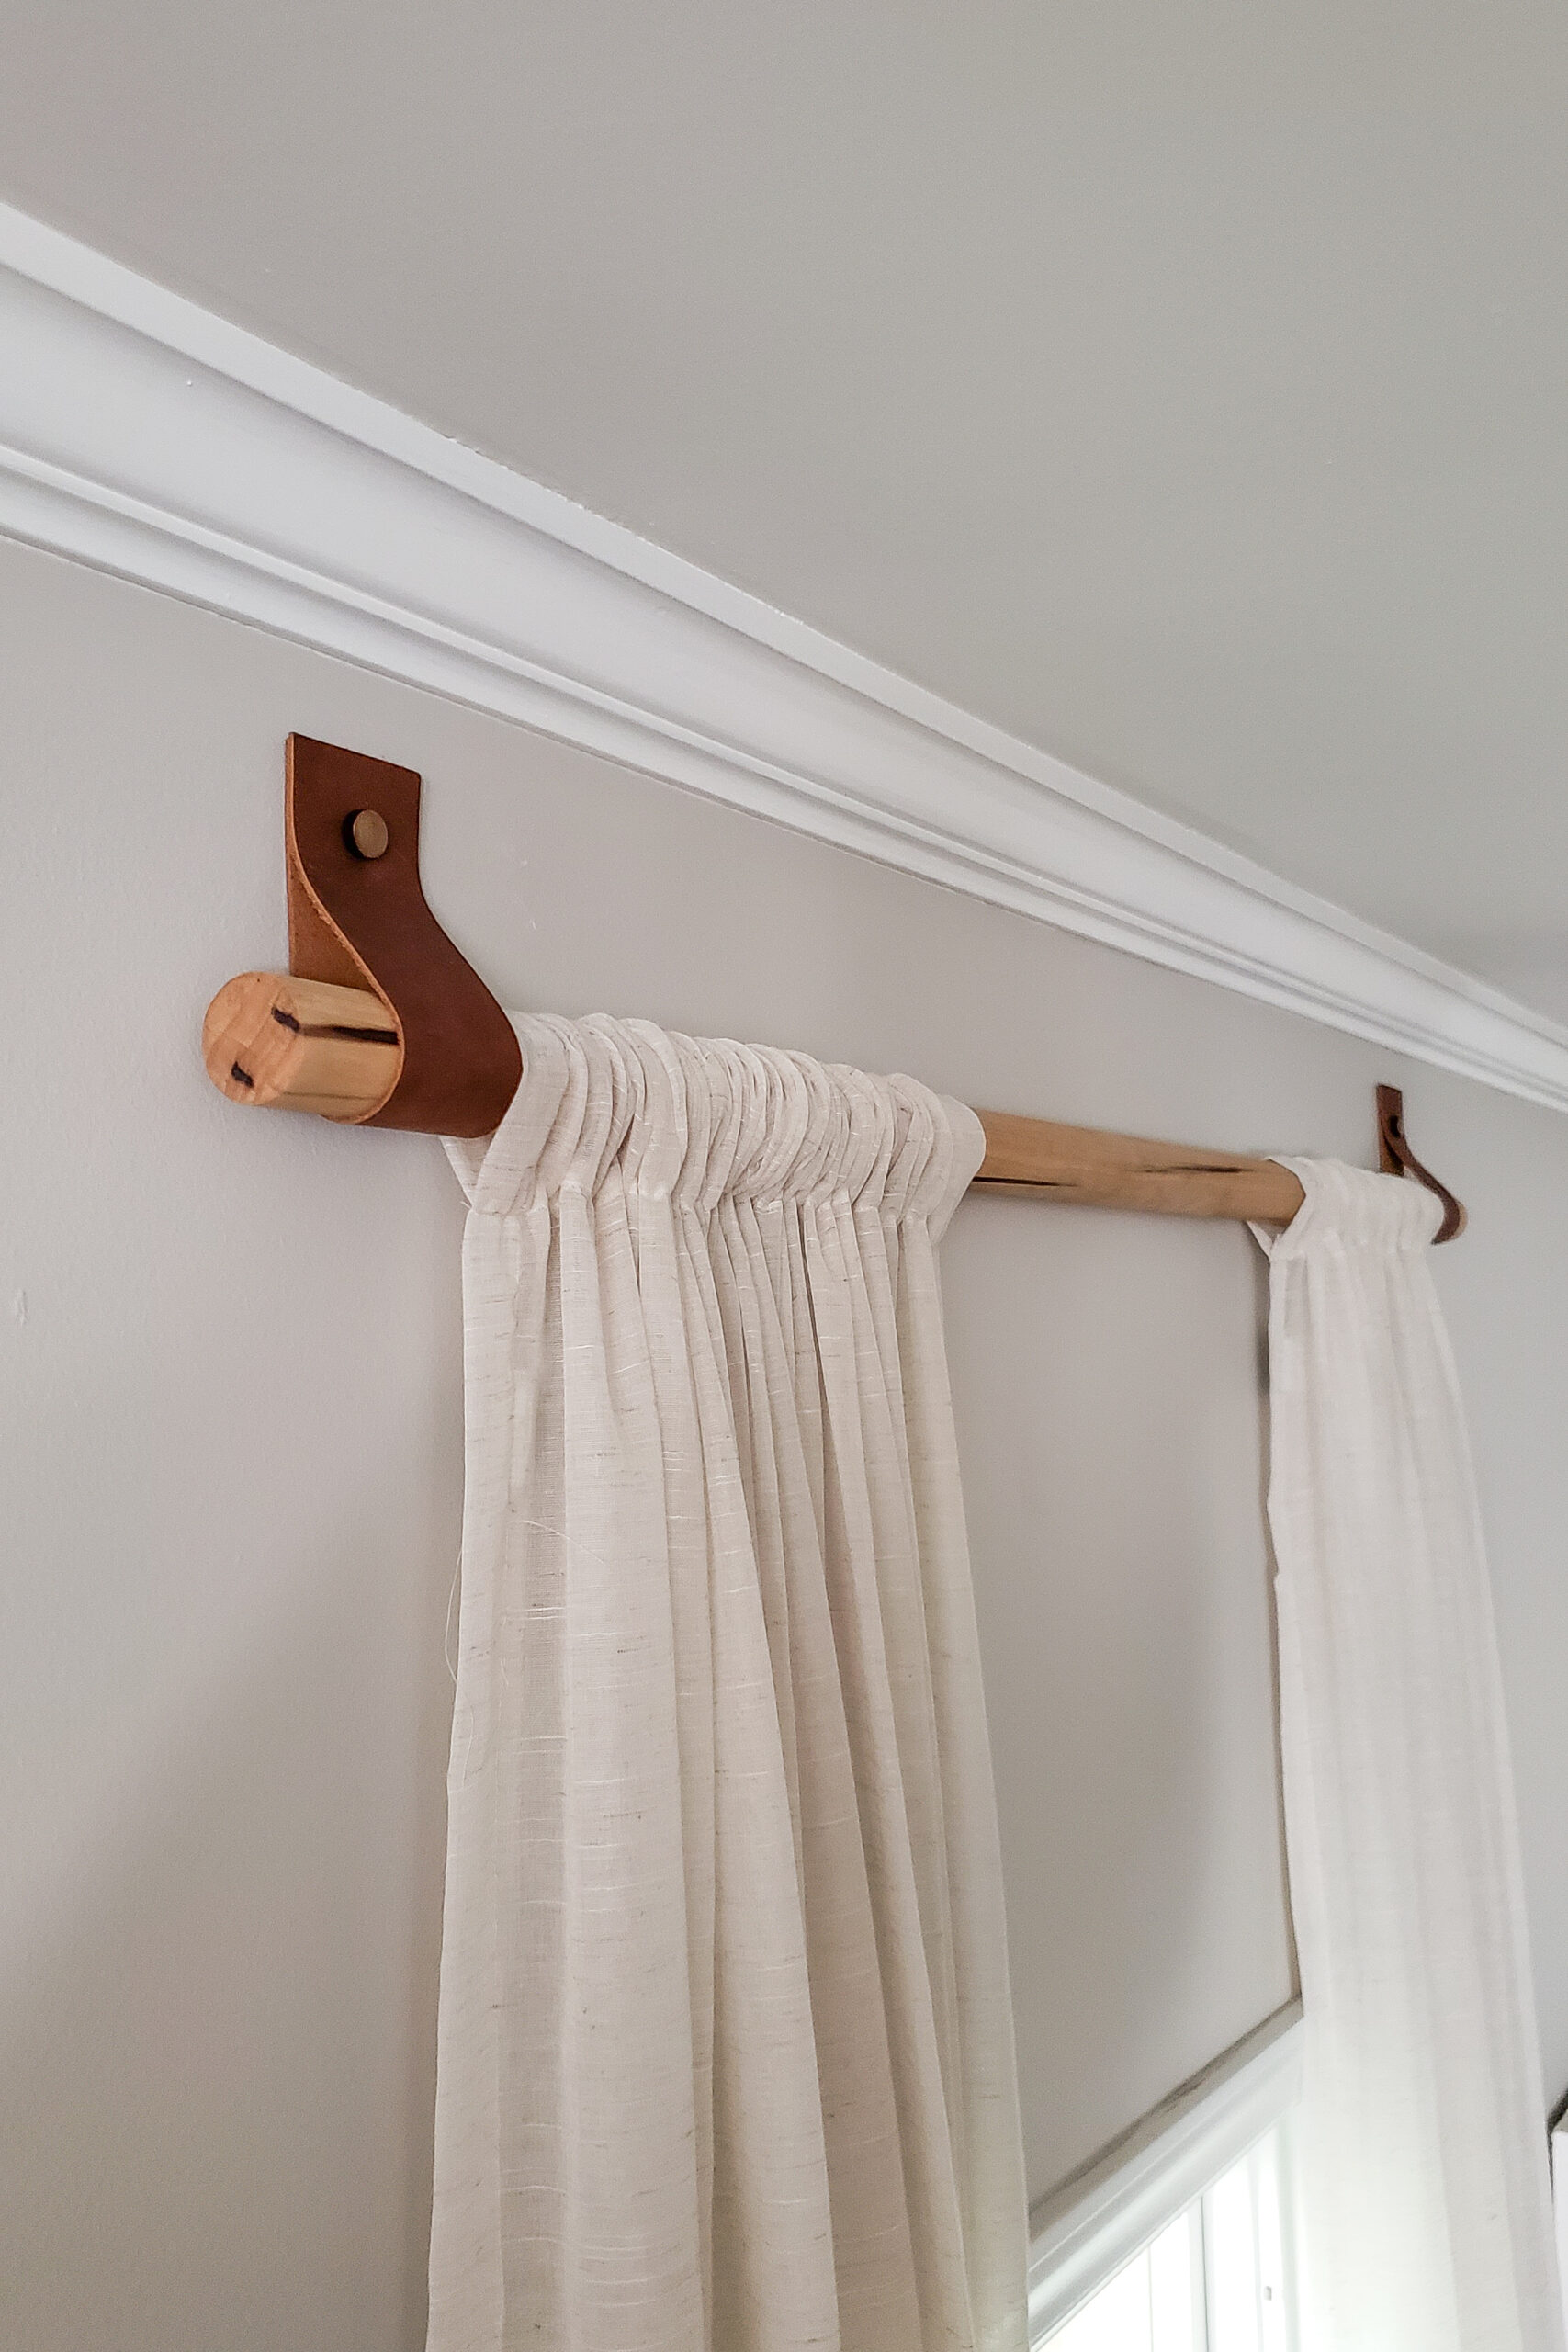 Wooden curtain rods for adding texture to your windows